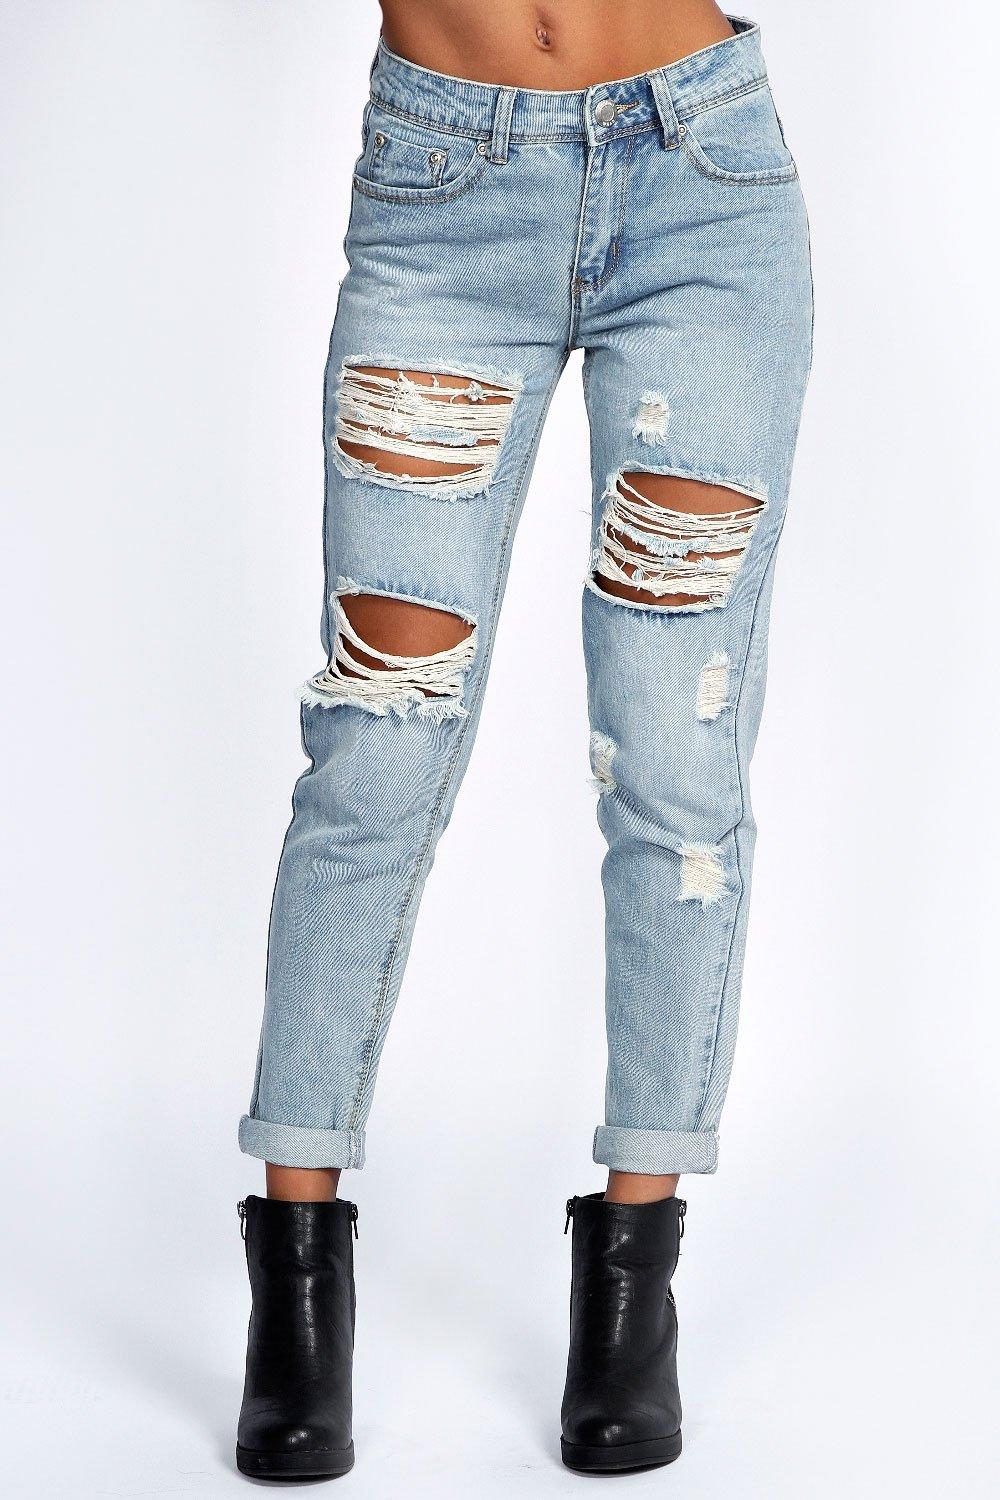 ripped jeans for women hover to zoom hgrdjoq